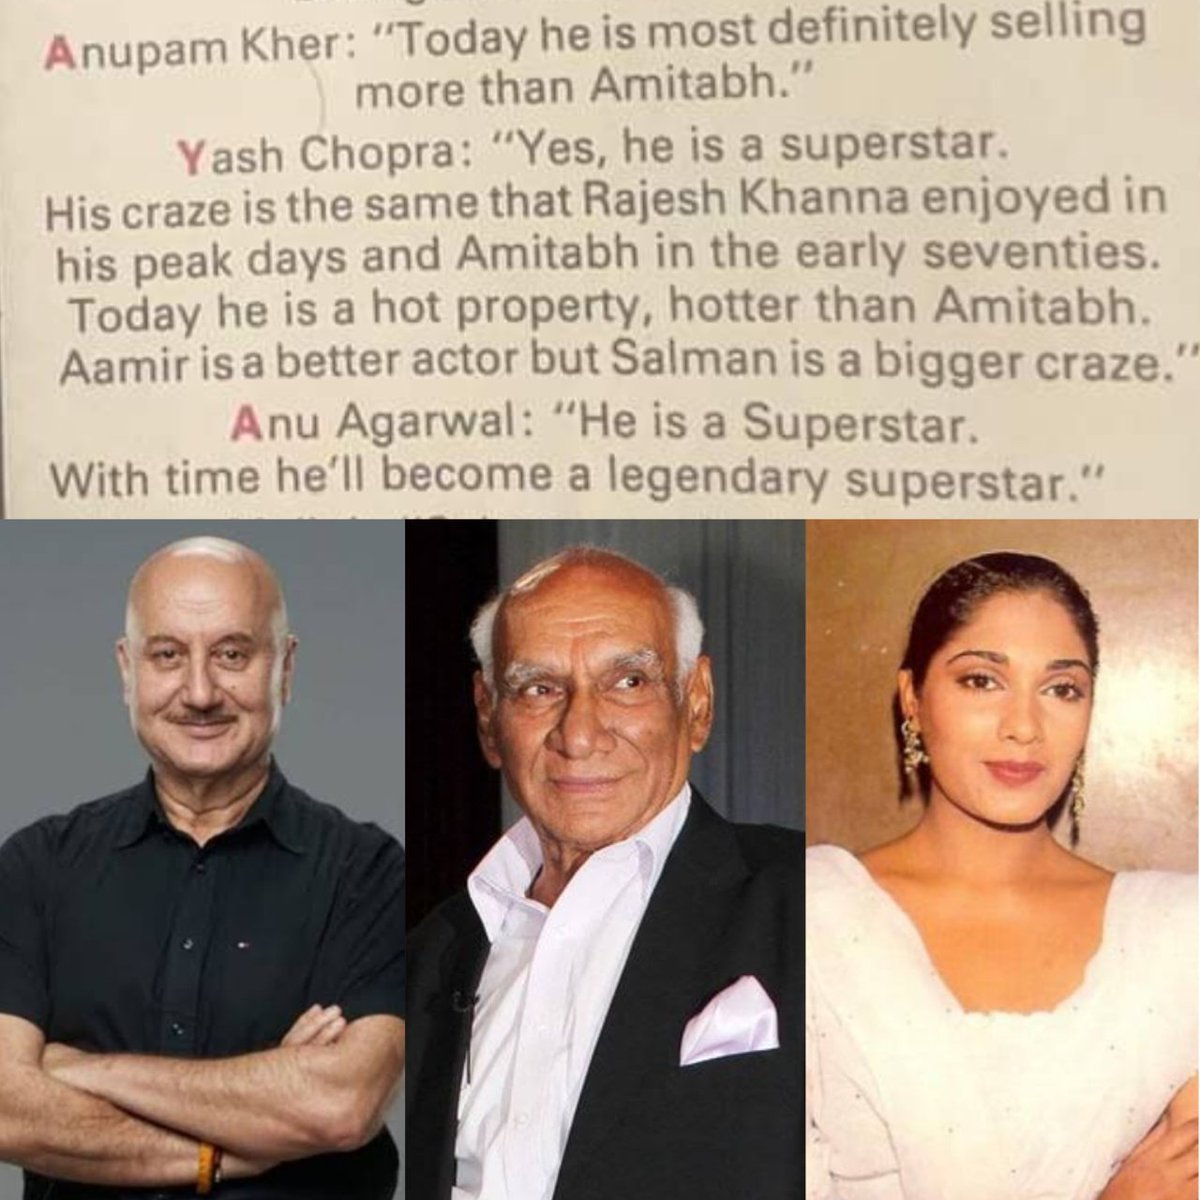 #AnupamKher : 'Today SALMAN's most definitely selling more than Amitabh'

#YashChopra : 'Yes, SALMAN is a Superstar, His Craze is the same that Rajesh Khanna & Amitabh enjoyed in their Peak days, Today He's hotter than Amitabh'

Remind you It was only his 3rd year in B'wood (3/9)